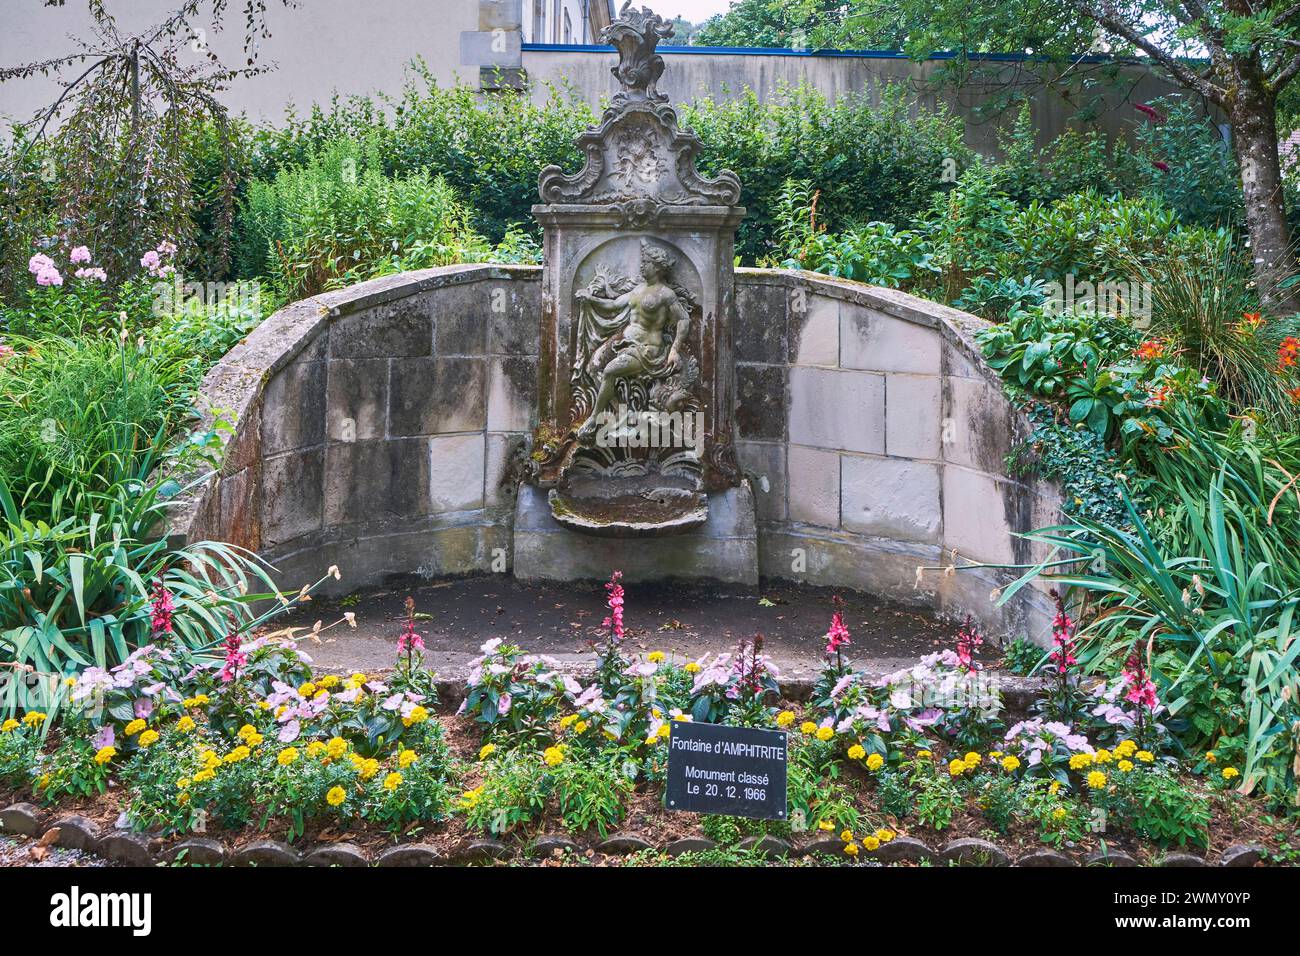 France, Vosges, Remiremont, Charles Friry Museum, vestige of the Grand Jardin du Chapter, Amphitrite Fountain, greek goddess of the sea Stock Photo